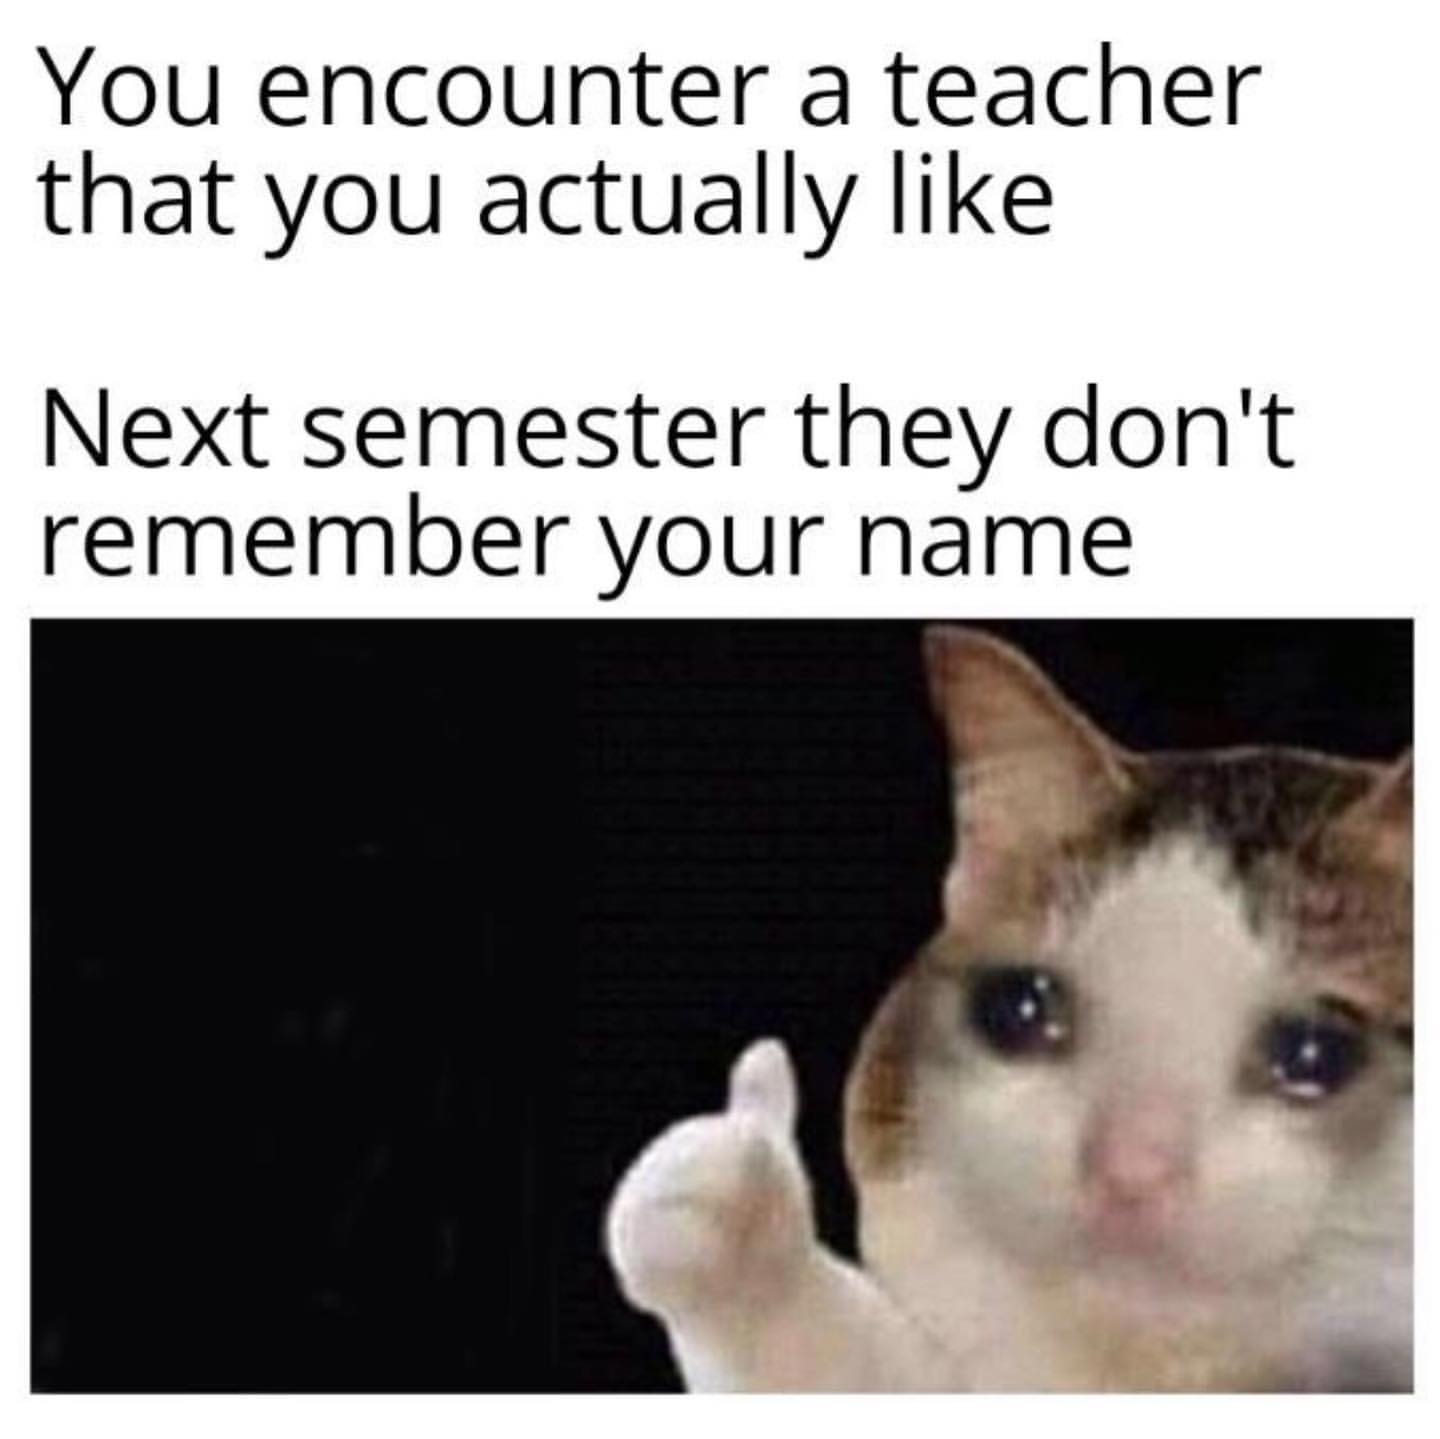 You encounter a teacher that you actually like.  Next semester they don't remember your name.